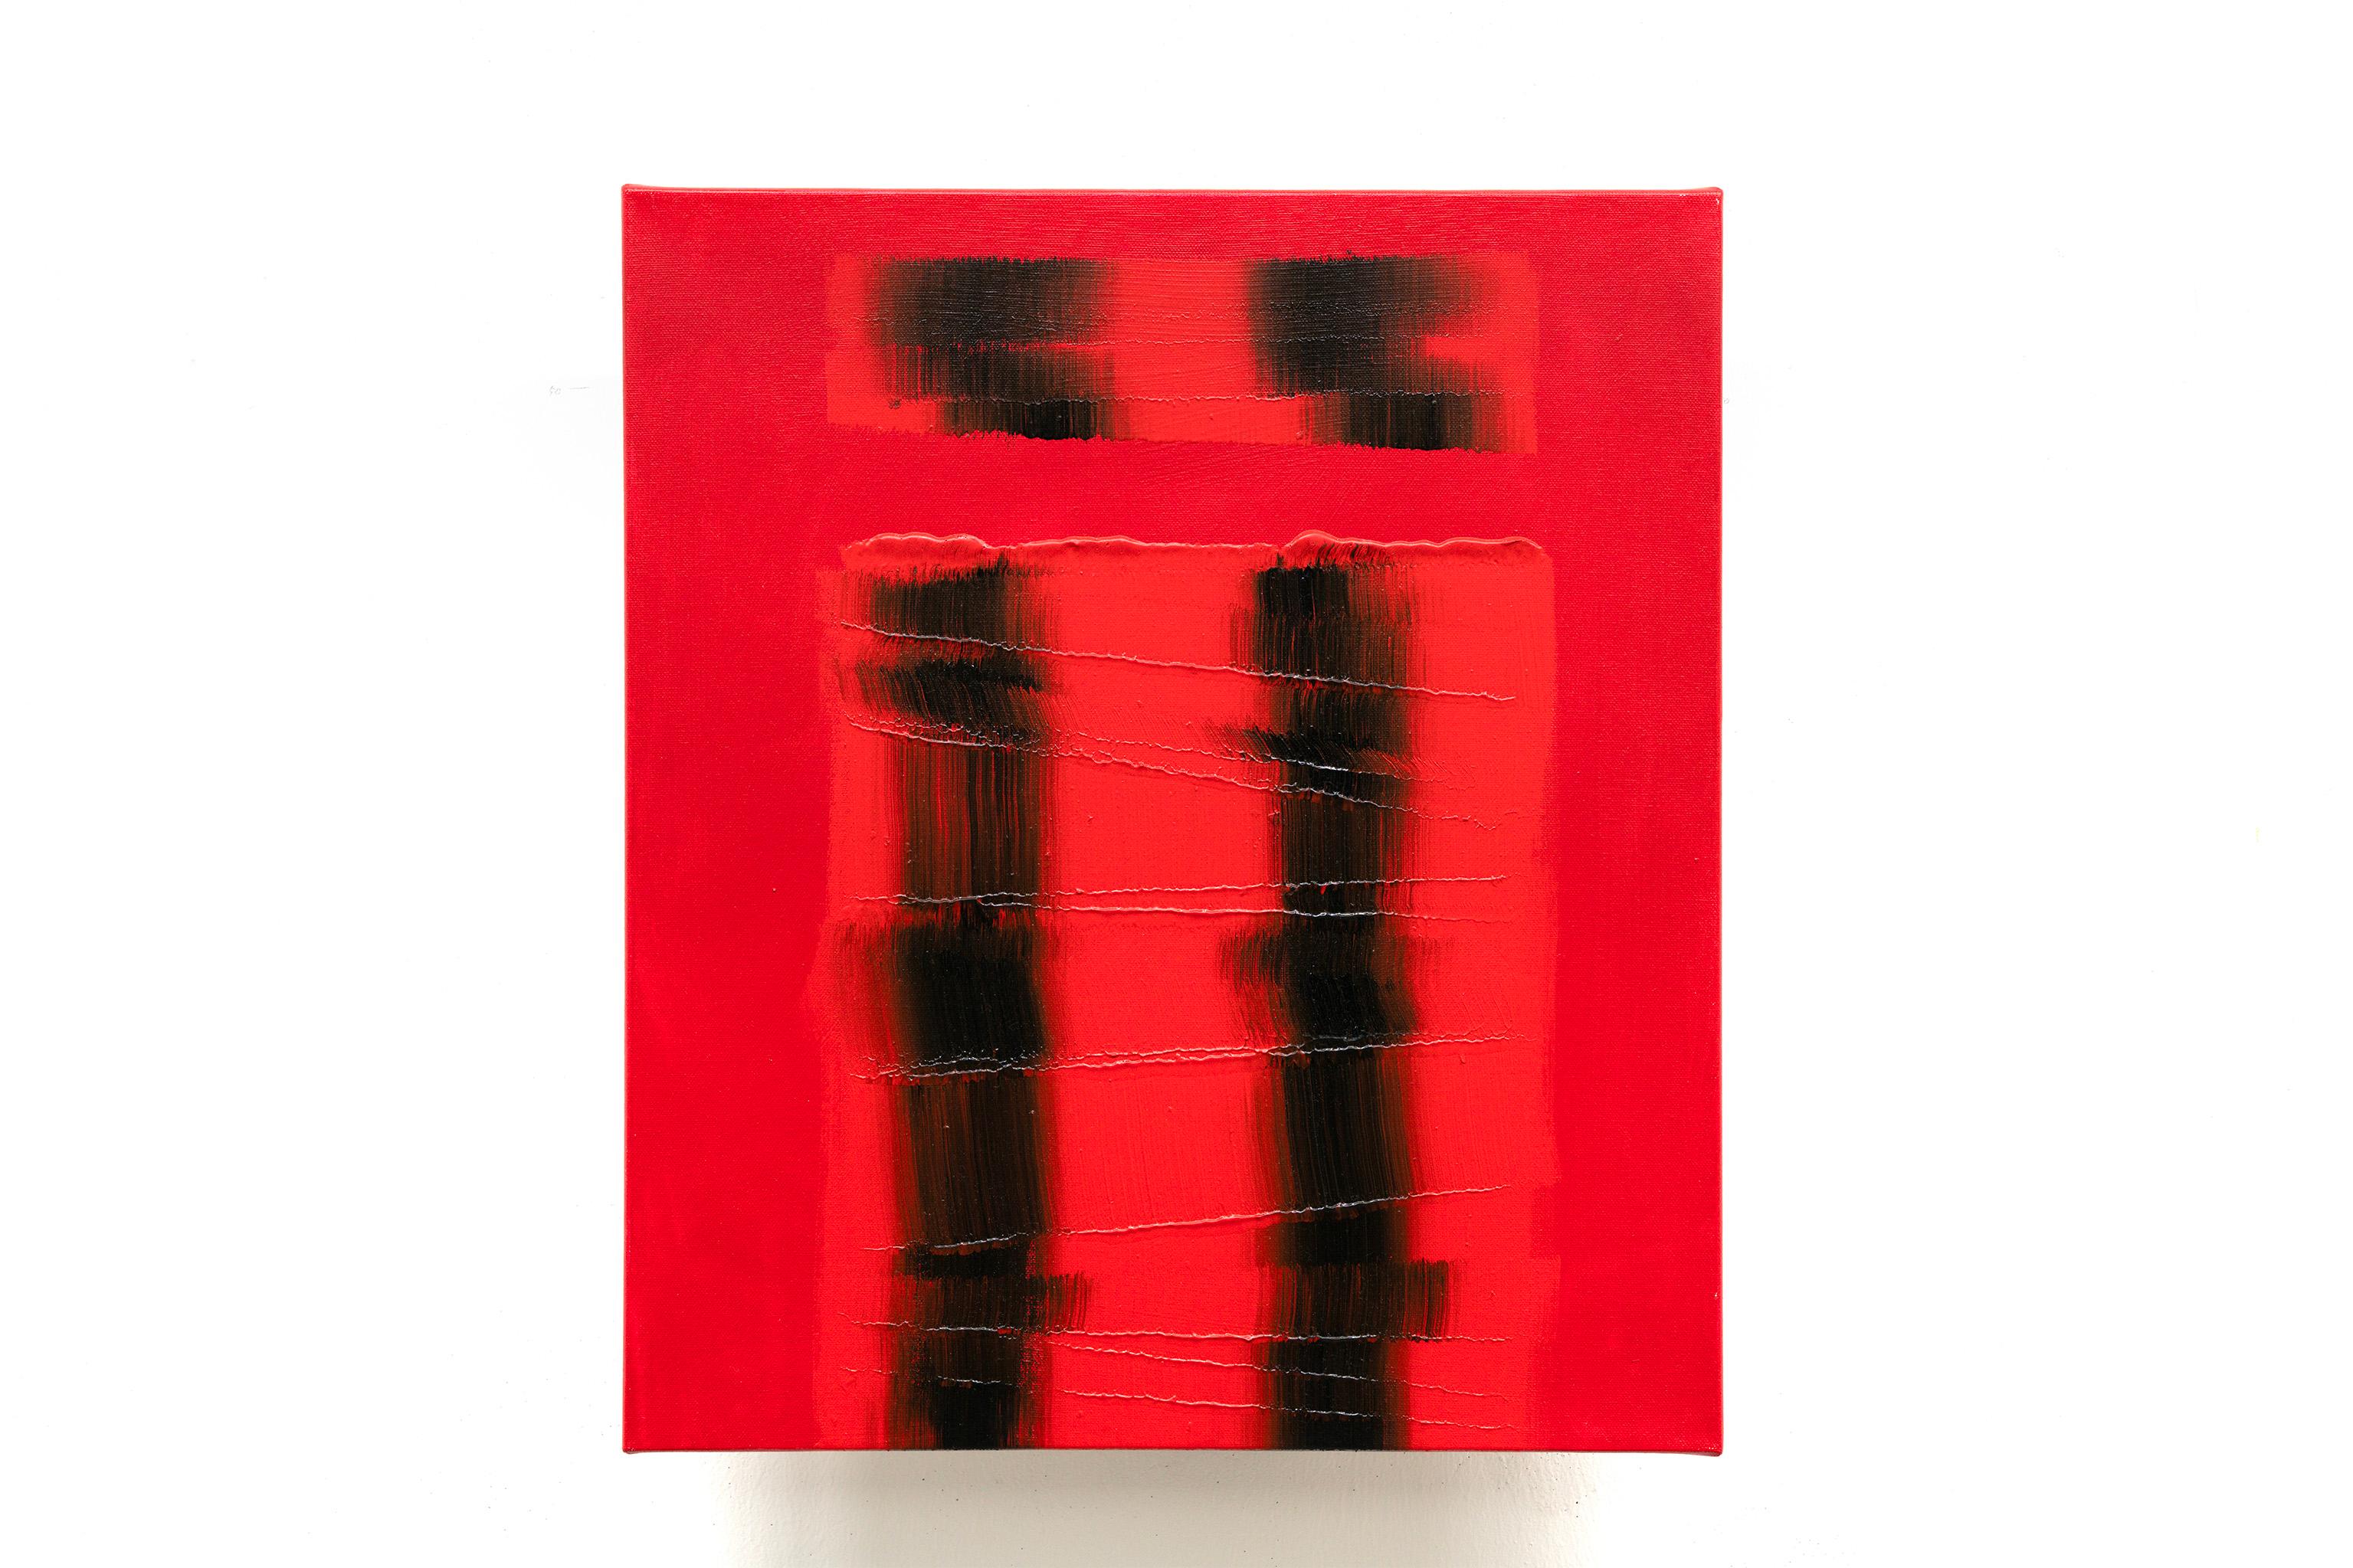 Baram 2 - Red Abstract Painting by Geonwoo Lee